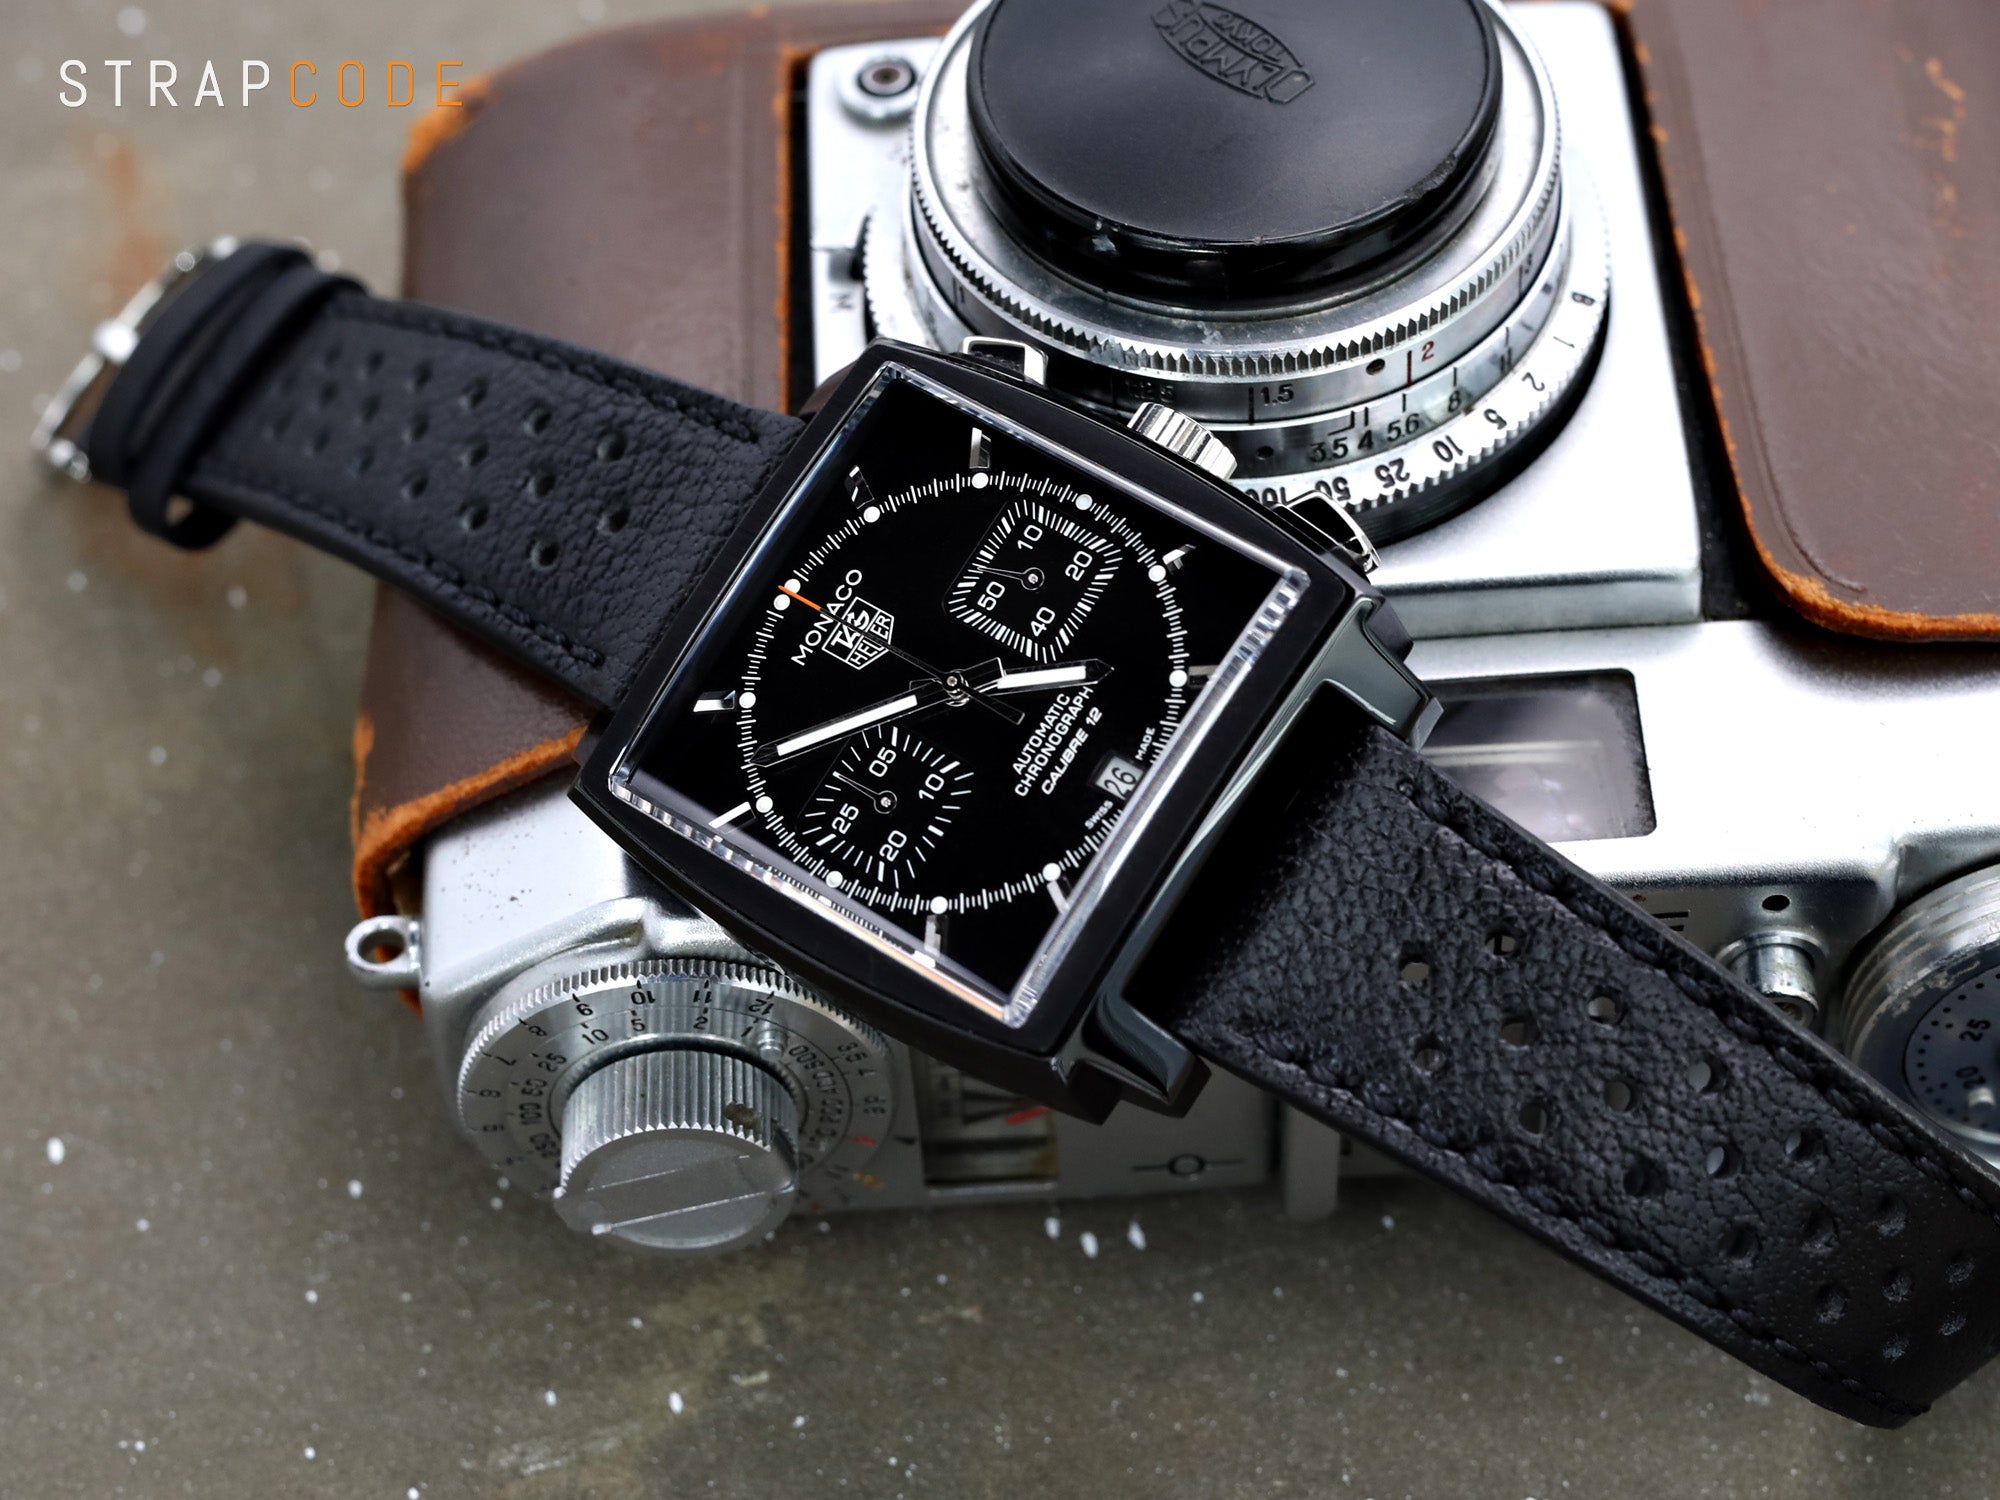 TAG Heuer CAW211M.FC6324 Monaco Calibre 12 Chronograph and a racing leather watch strap by Strapcode